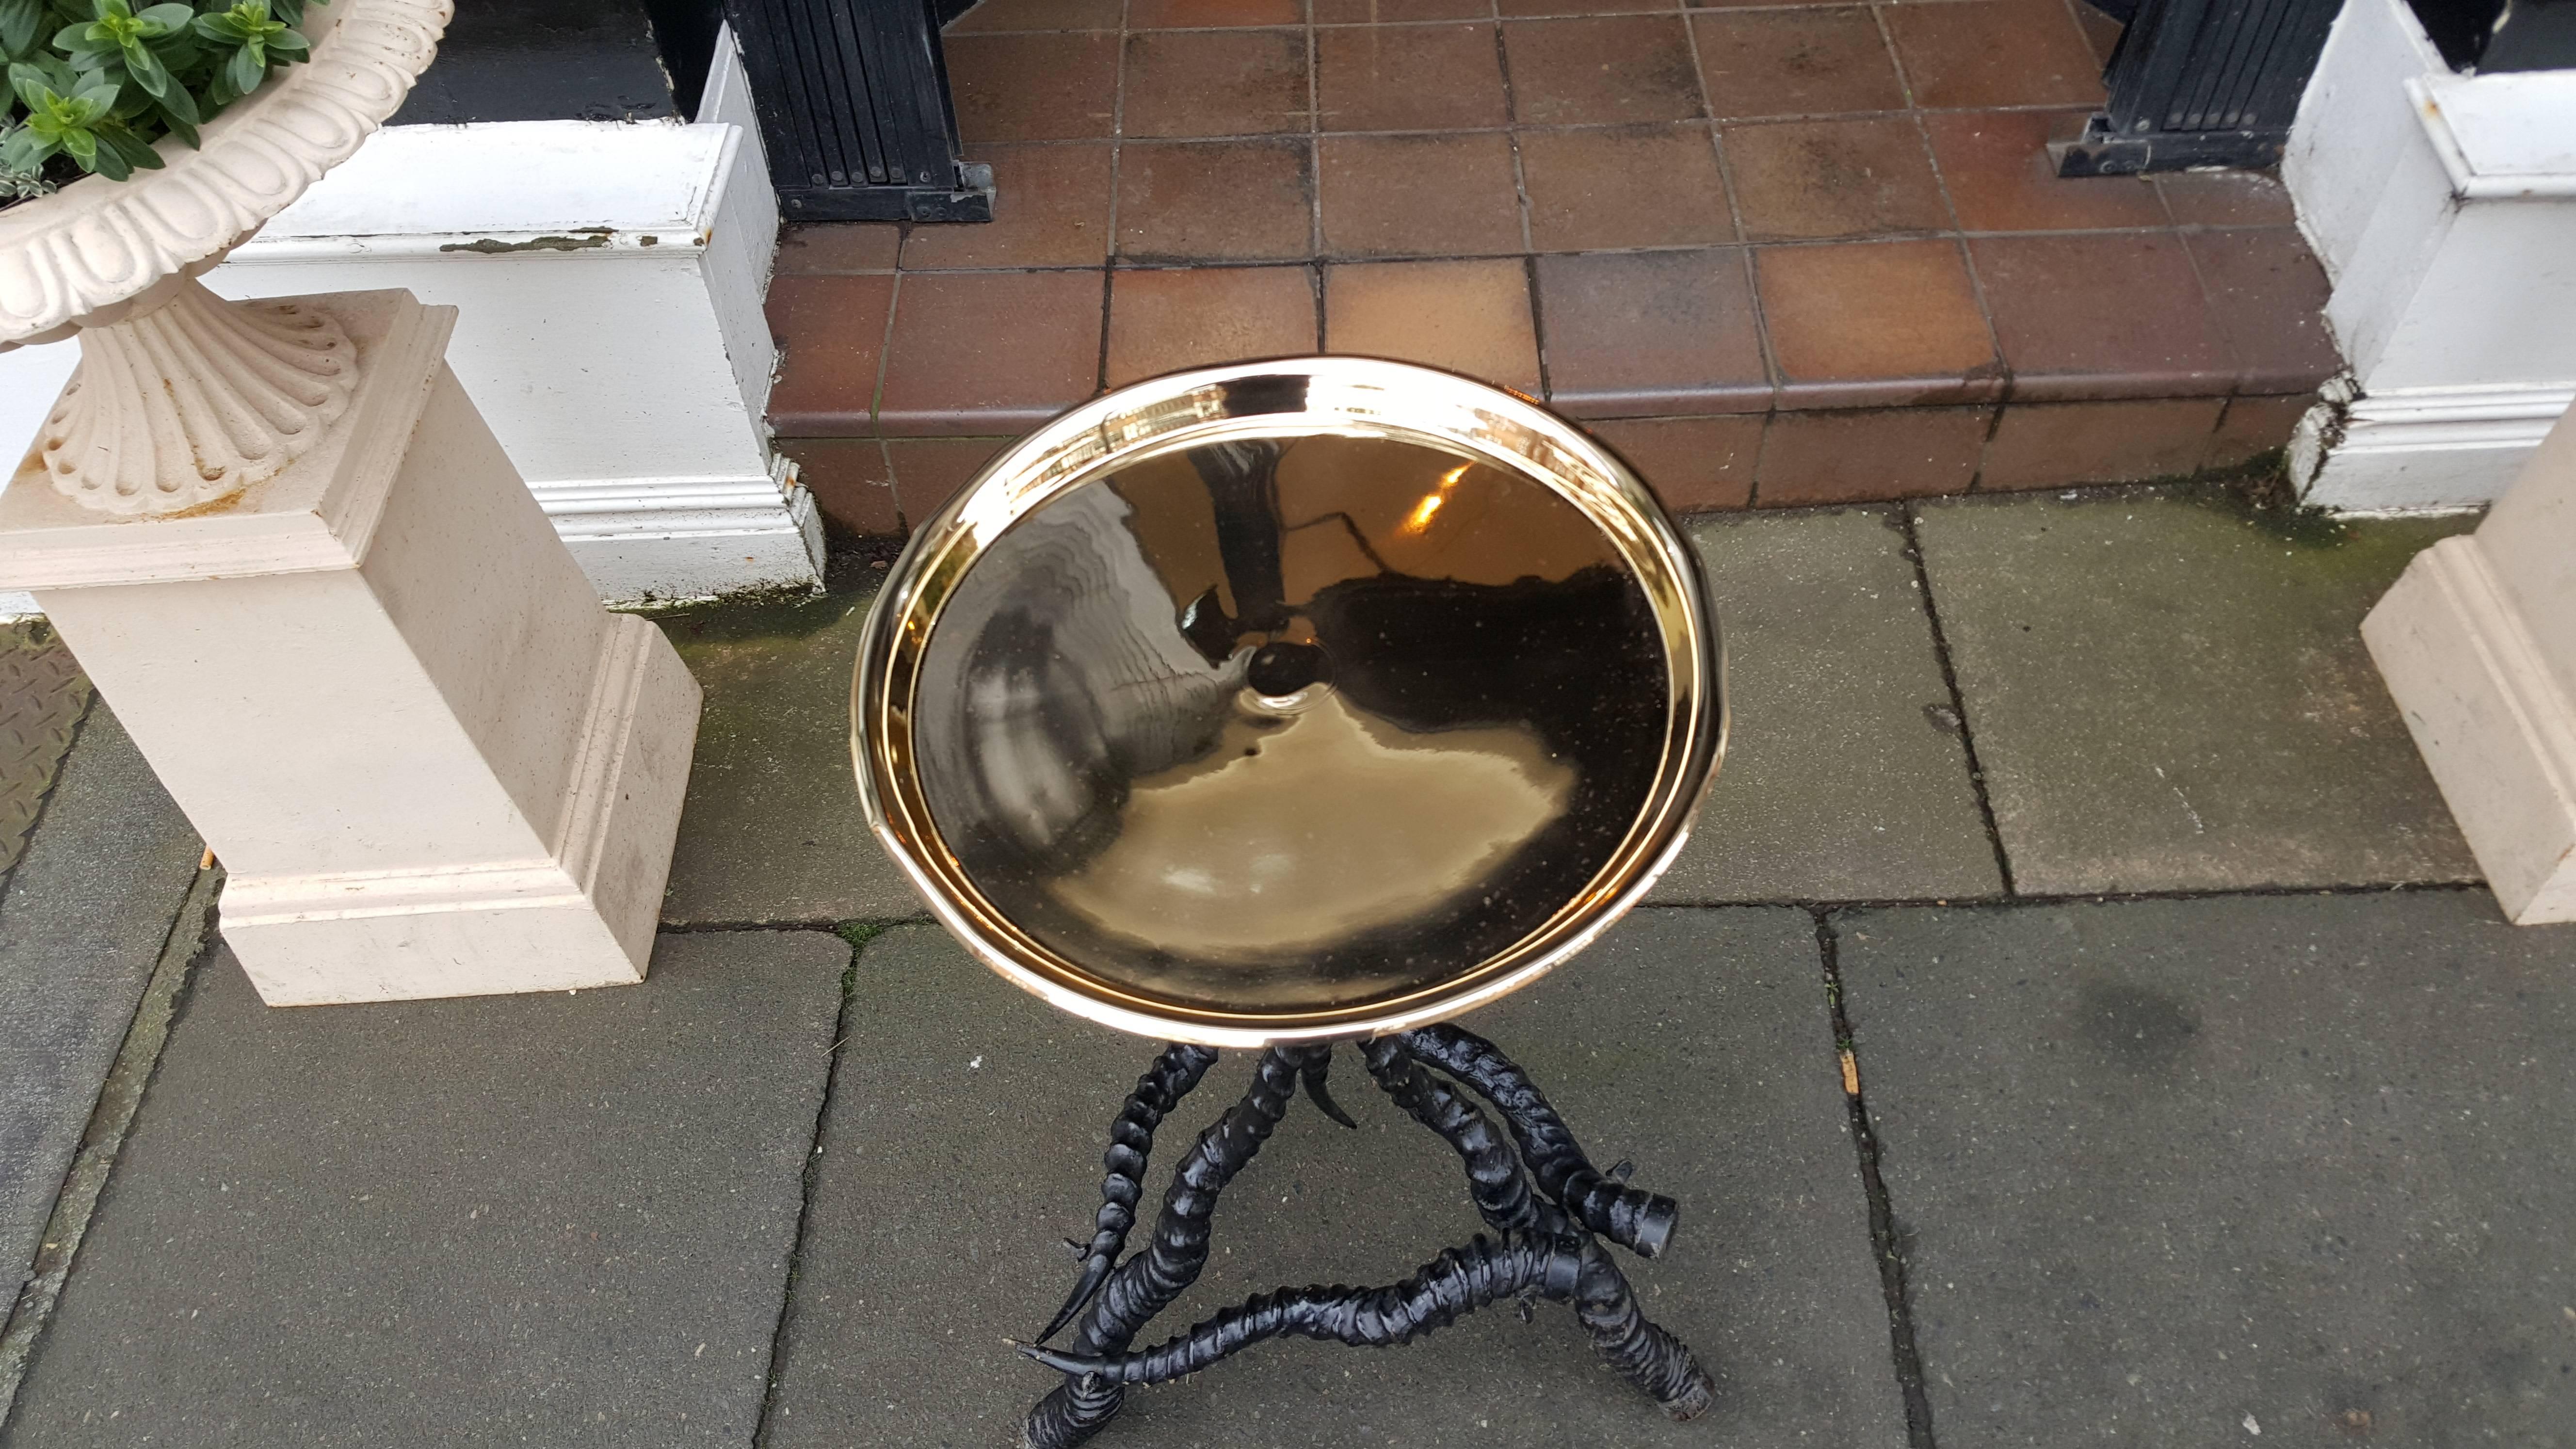 Late 19th century brass topped table formed from Indian blackbuck horns
16